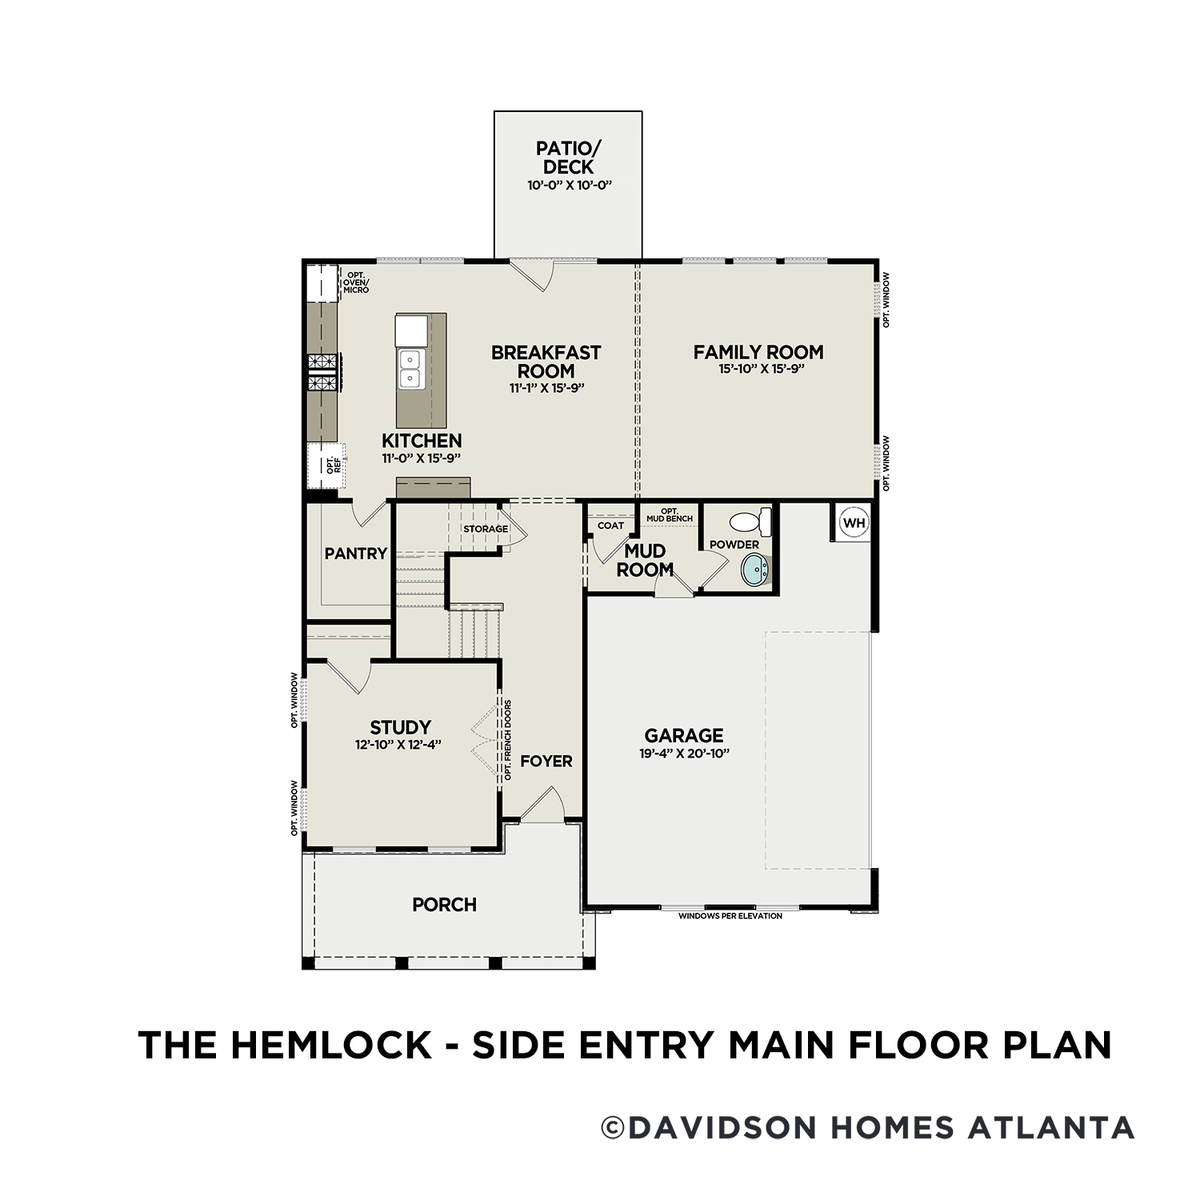 1 - The Hemlock A – Side Entry buildable floor plan layout in Davidson Homes' Mountainbrook community.